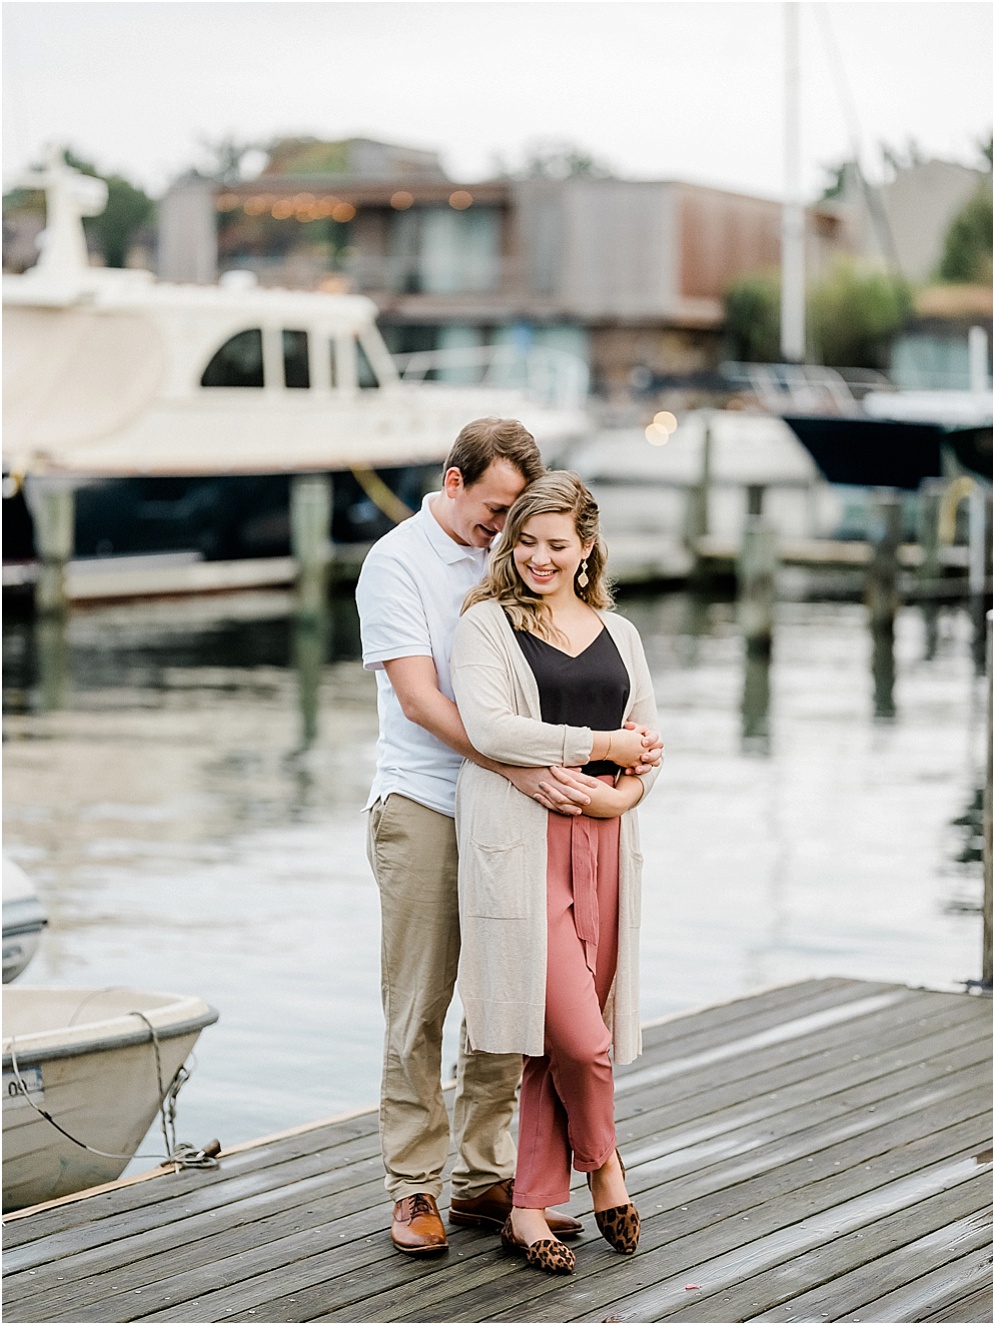 A playful engagement session in Downtown Annapolis